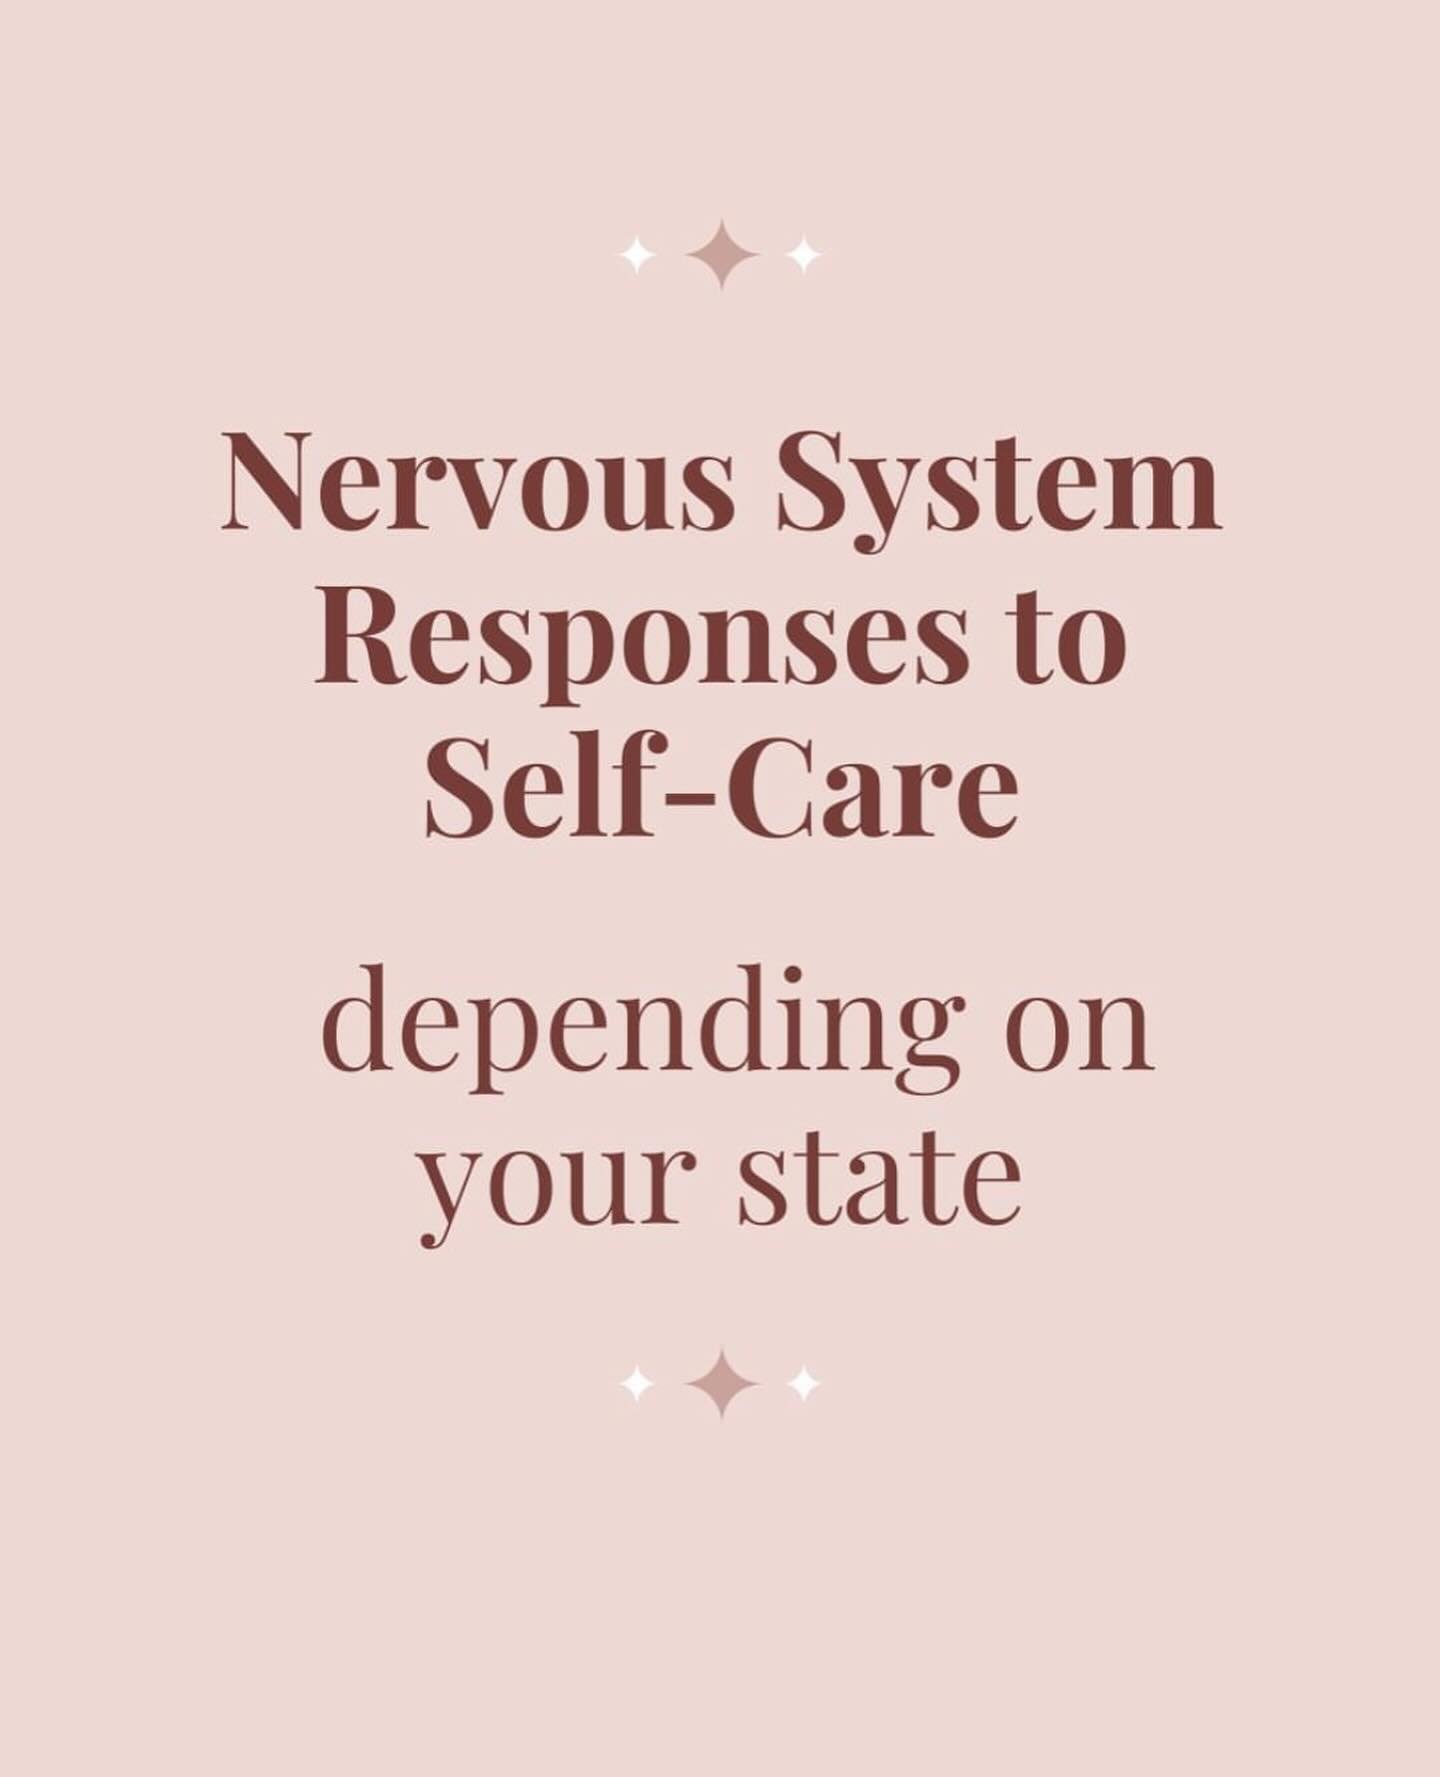 Resisting self care? [I mean that in the nervous system honouring self care.. whatever that looks like to you]. 

Which state do you sit in when it comes to self care?
And did you realise that depending on the task at hand
- ie self-care, vs care for